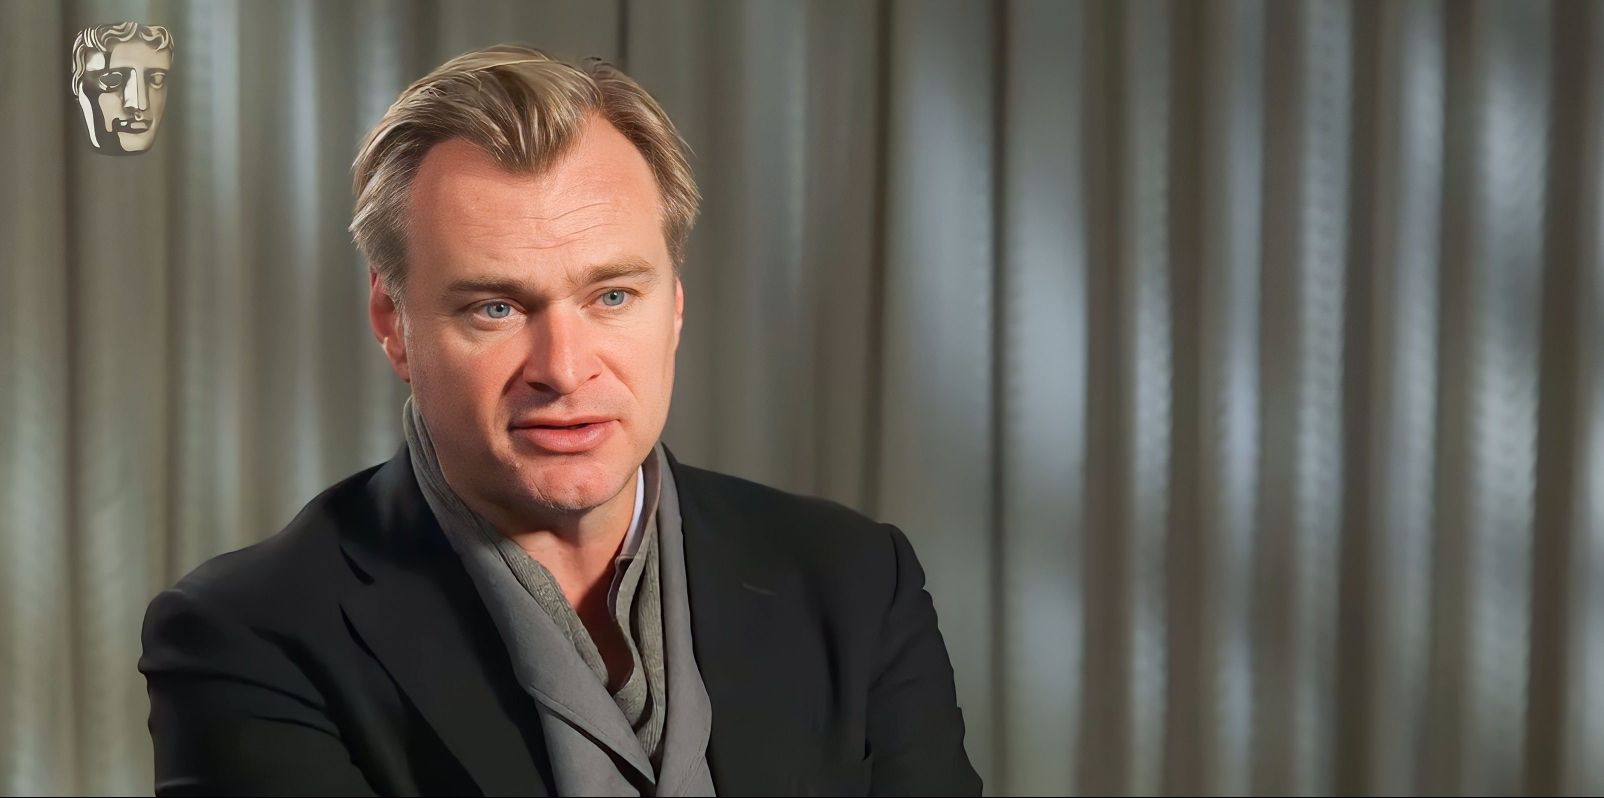 christopher nolan news,christopher nolan never went to film school,christopher nolan doesn&#039;t have a phone,christopher nolan new movie poster,will christopher nolan make a marvel movie,will christopher nolan direct a marvel movie,christopher nolan don&#039;t use mobile,christopher nolan no phone